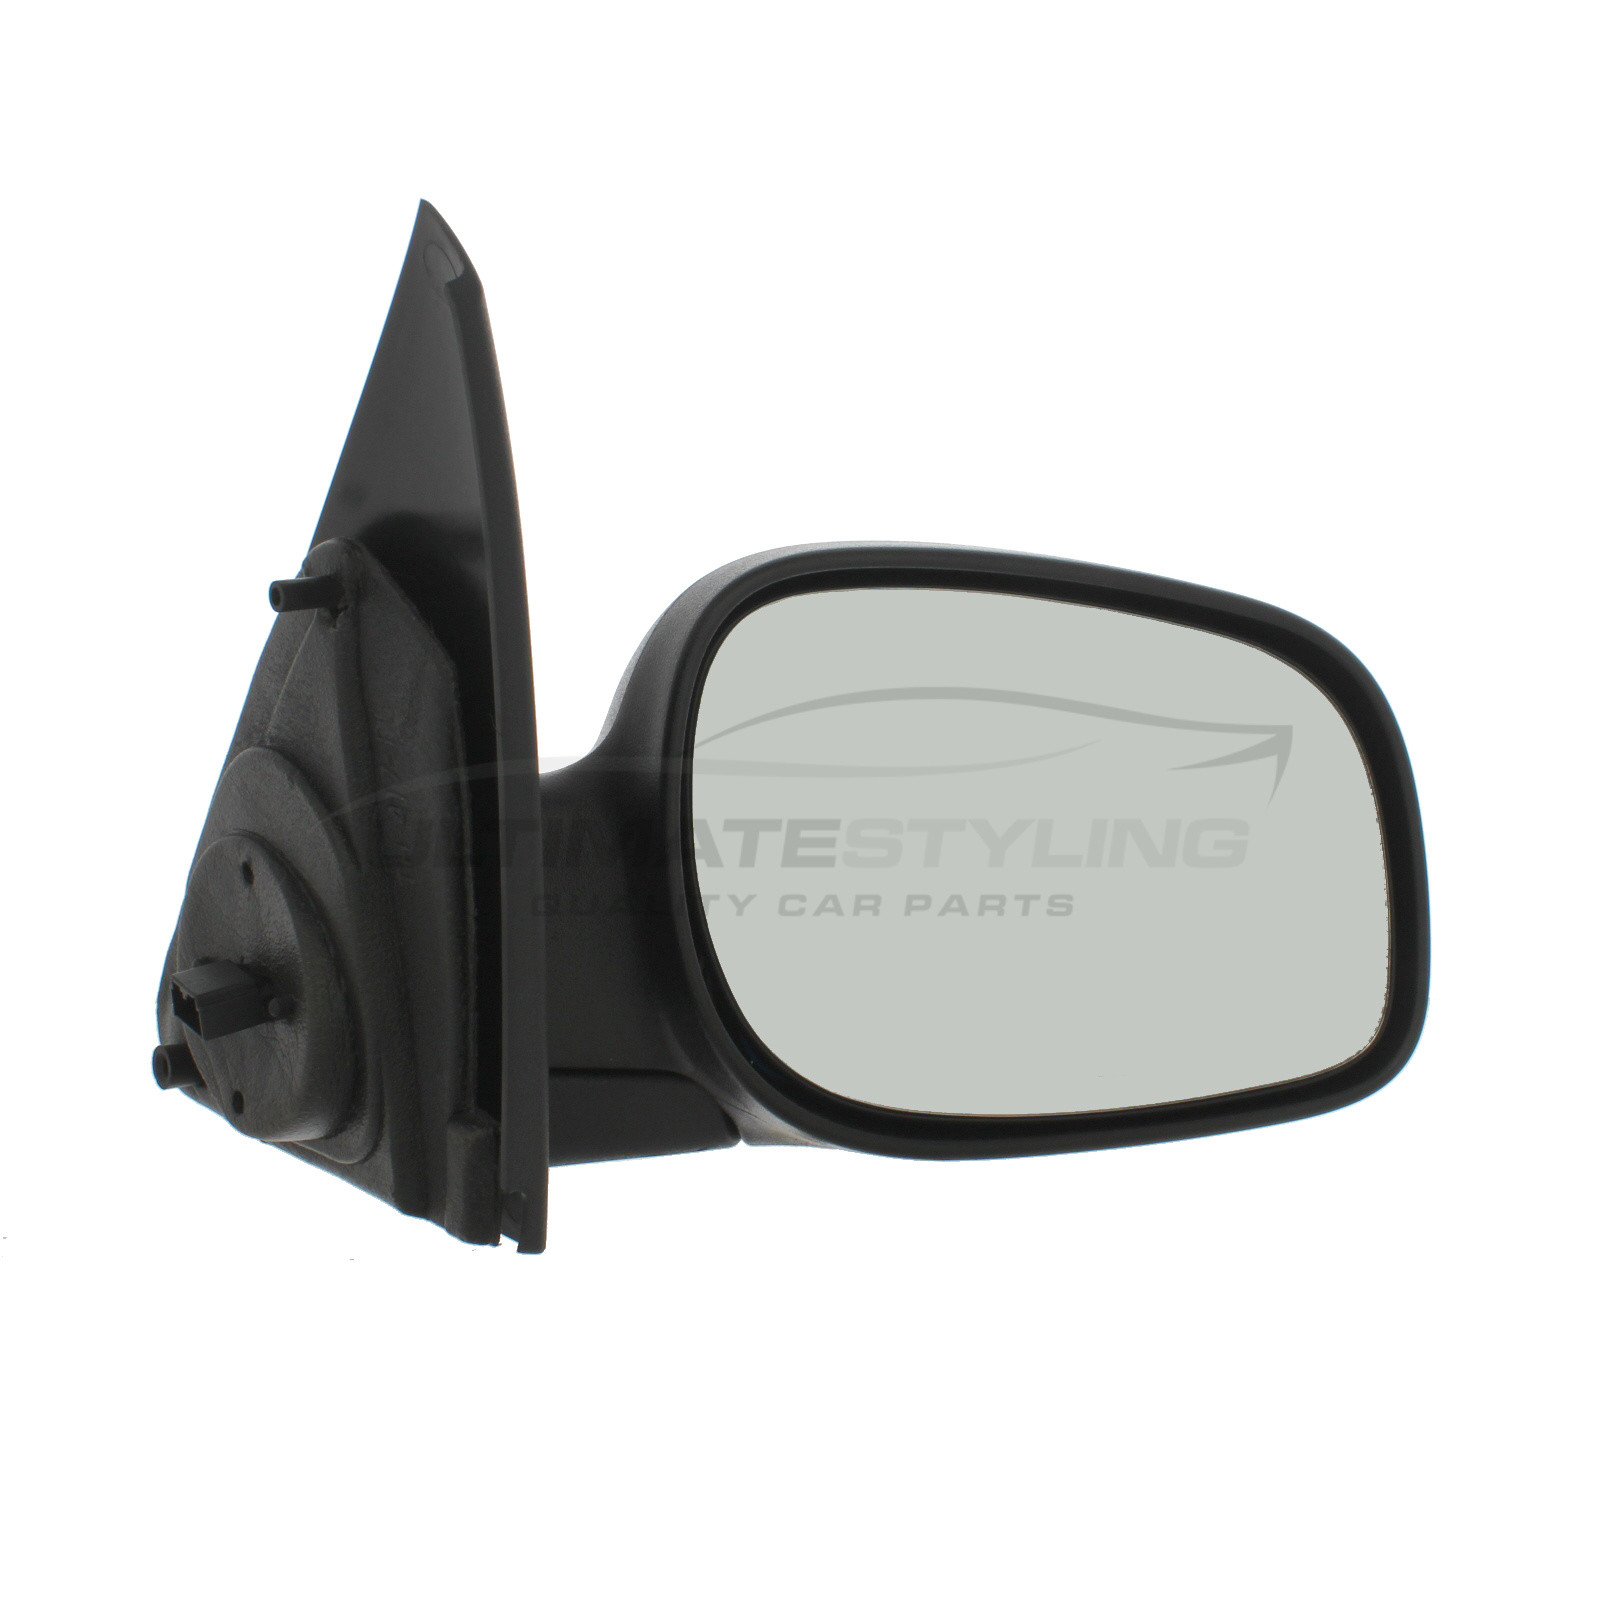 Details about   02-03 Land Rover Freelander RH Passenger Side Mirror OEM Heated Right Glass